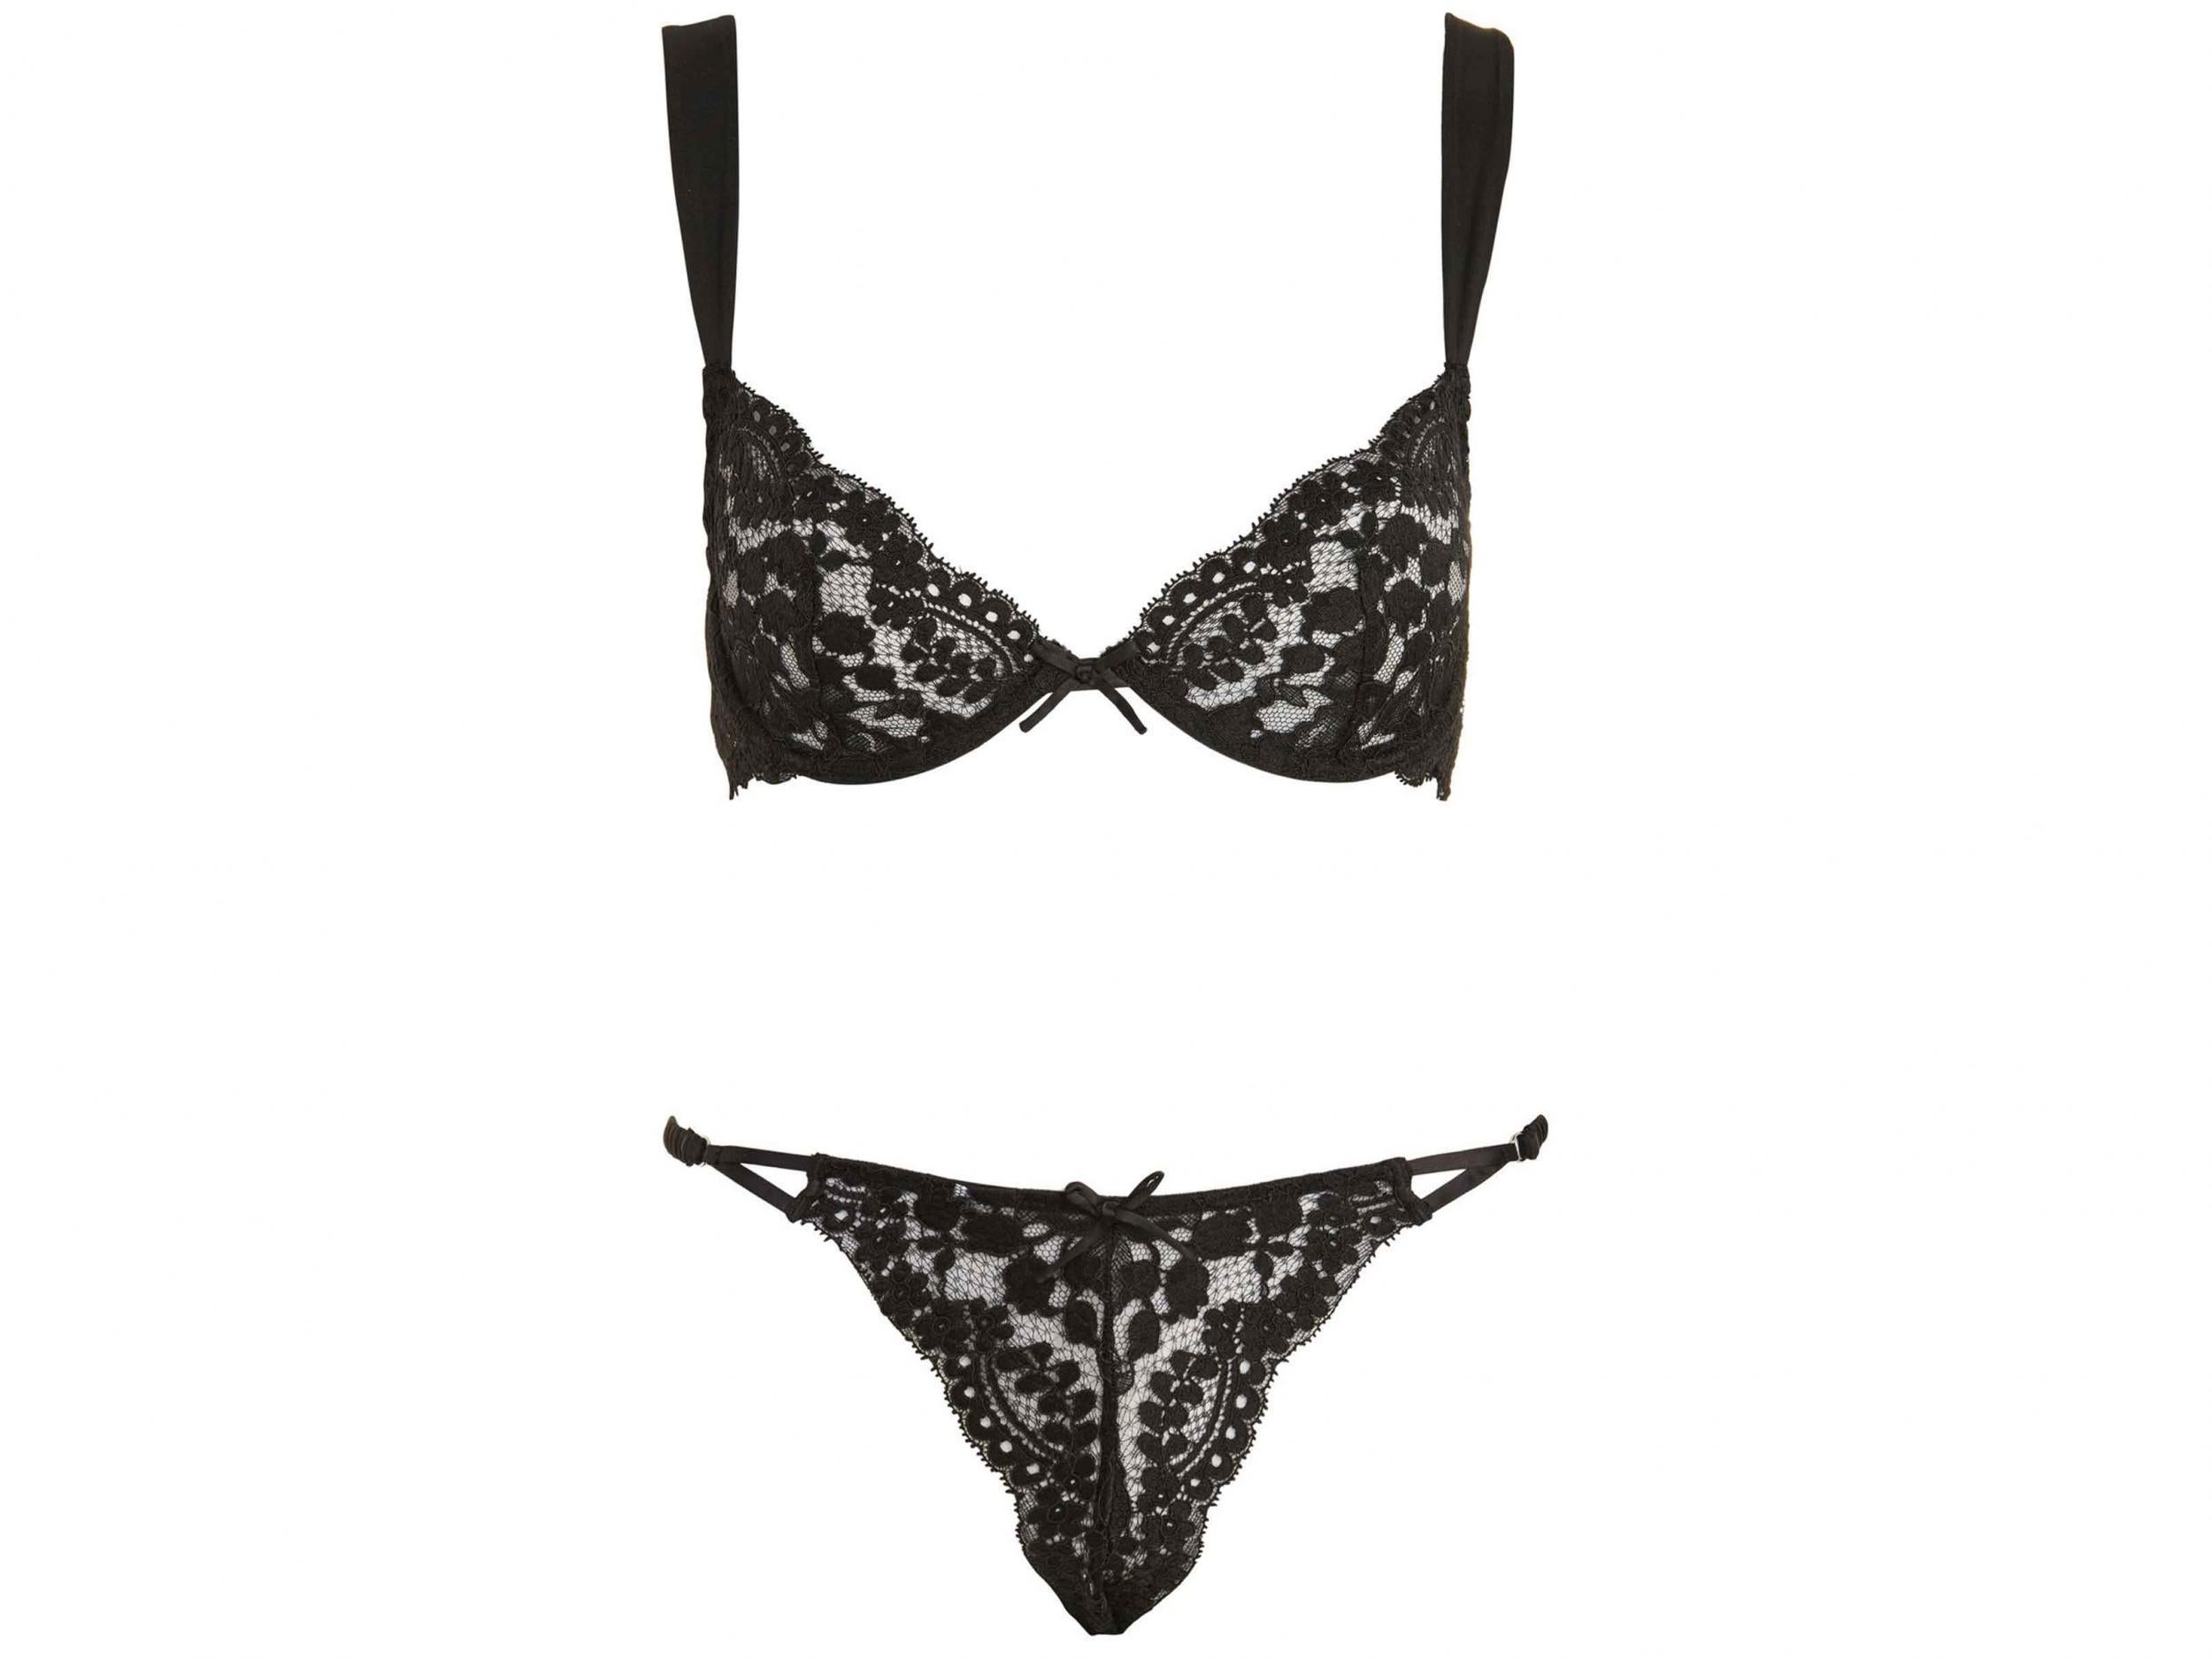 A man's guide to gifting lingerie this Christmas